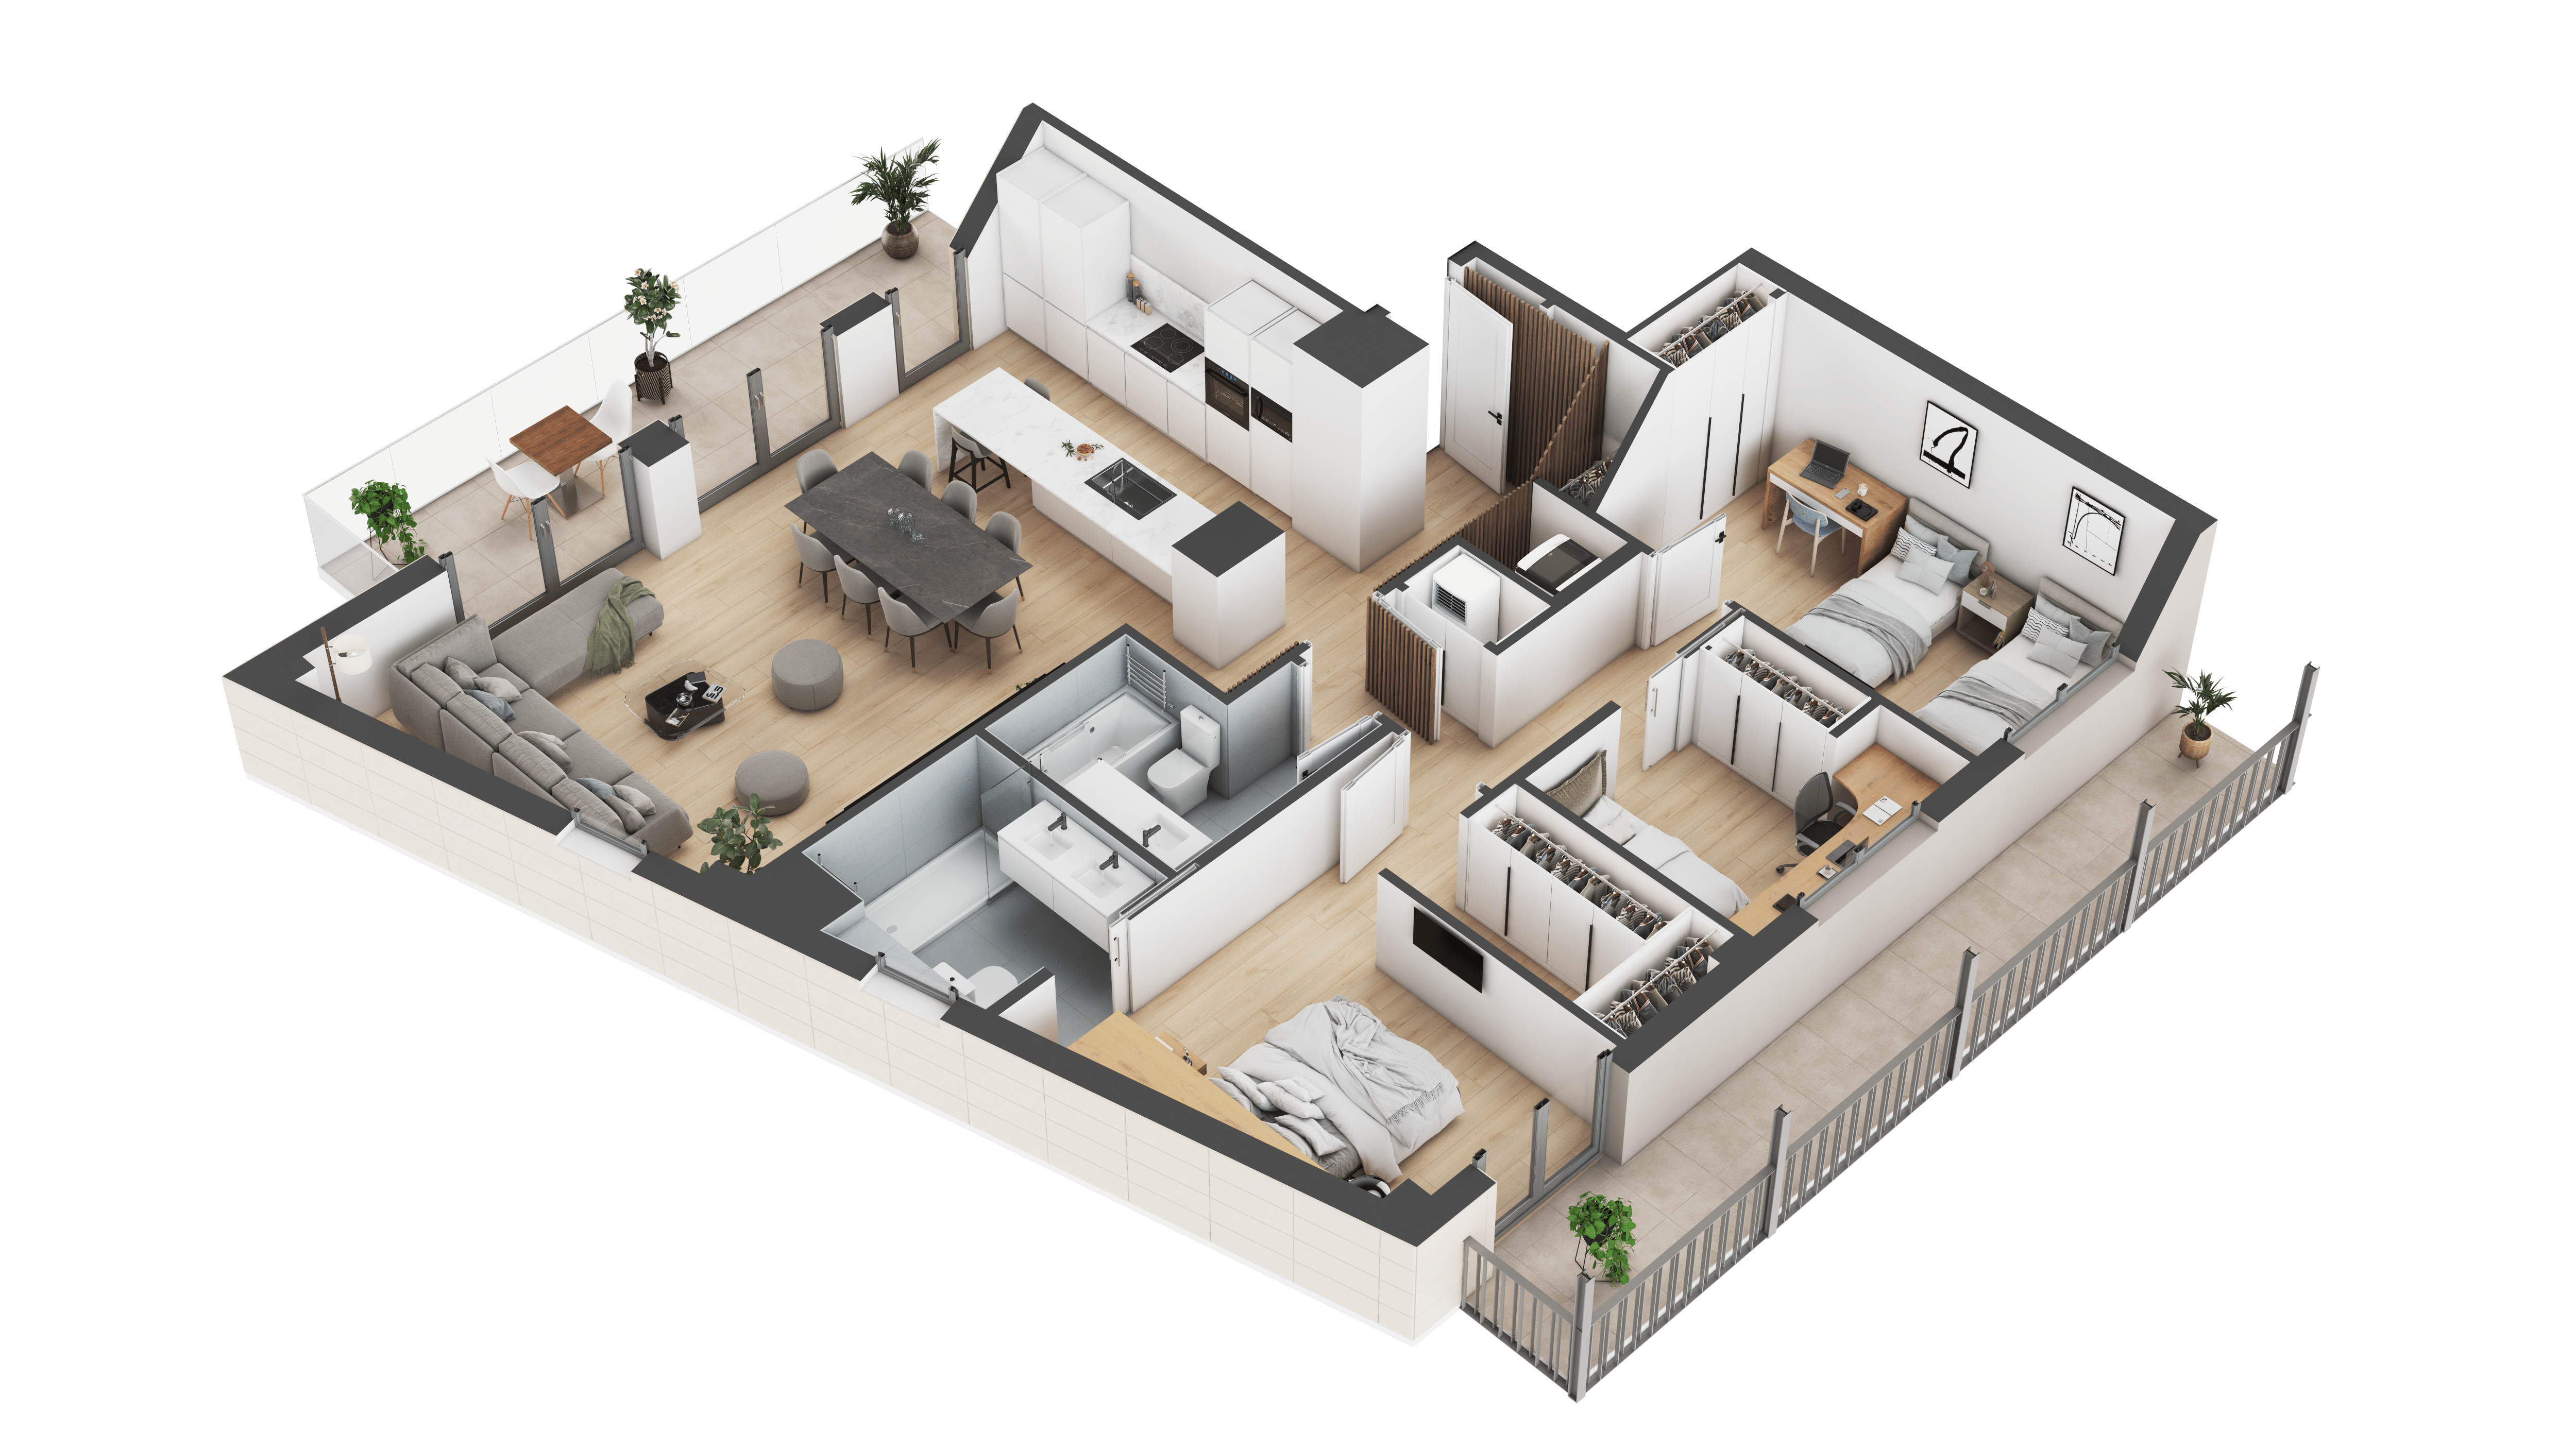 High definition rendering of 3d model apartment in paris with 2 bedrooms, office, 1 guest bathroom and open kitchen using 4k rendering and architectural rendering online tool